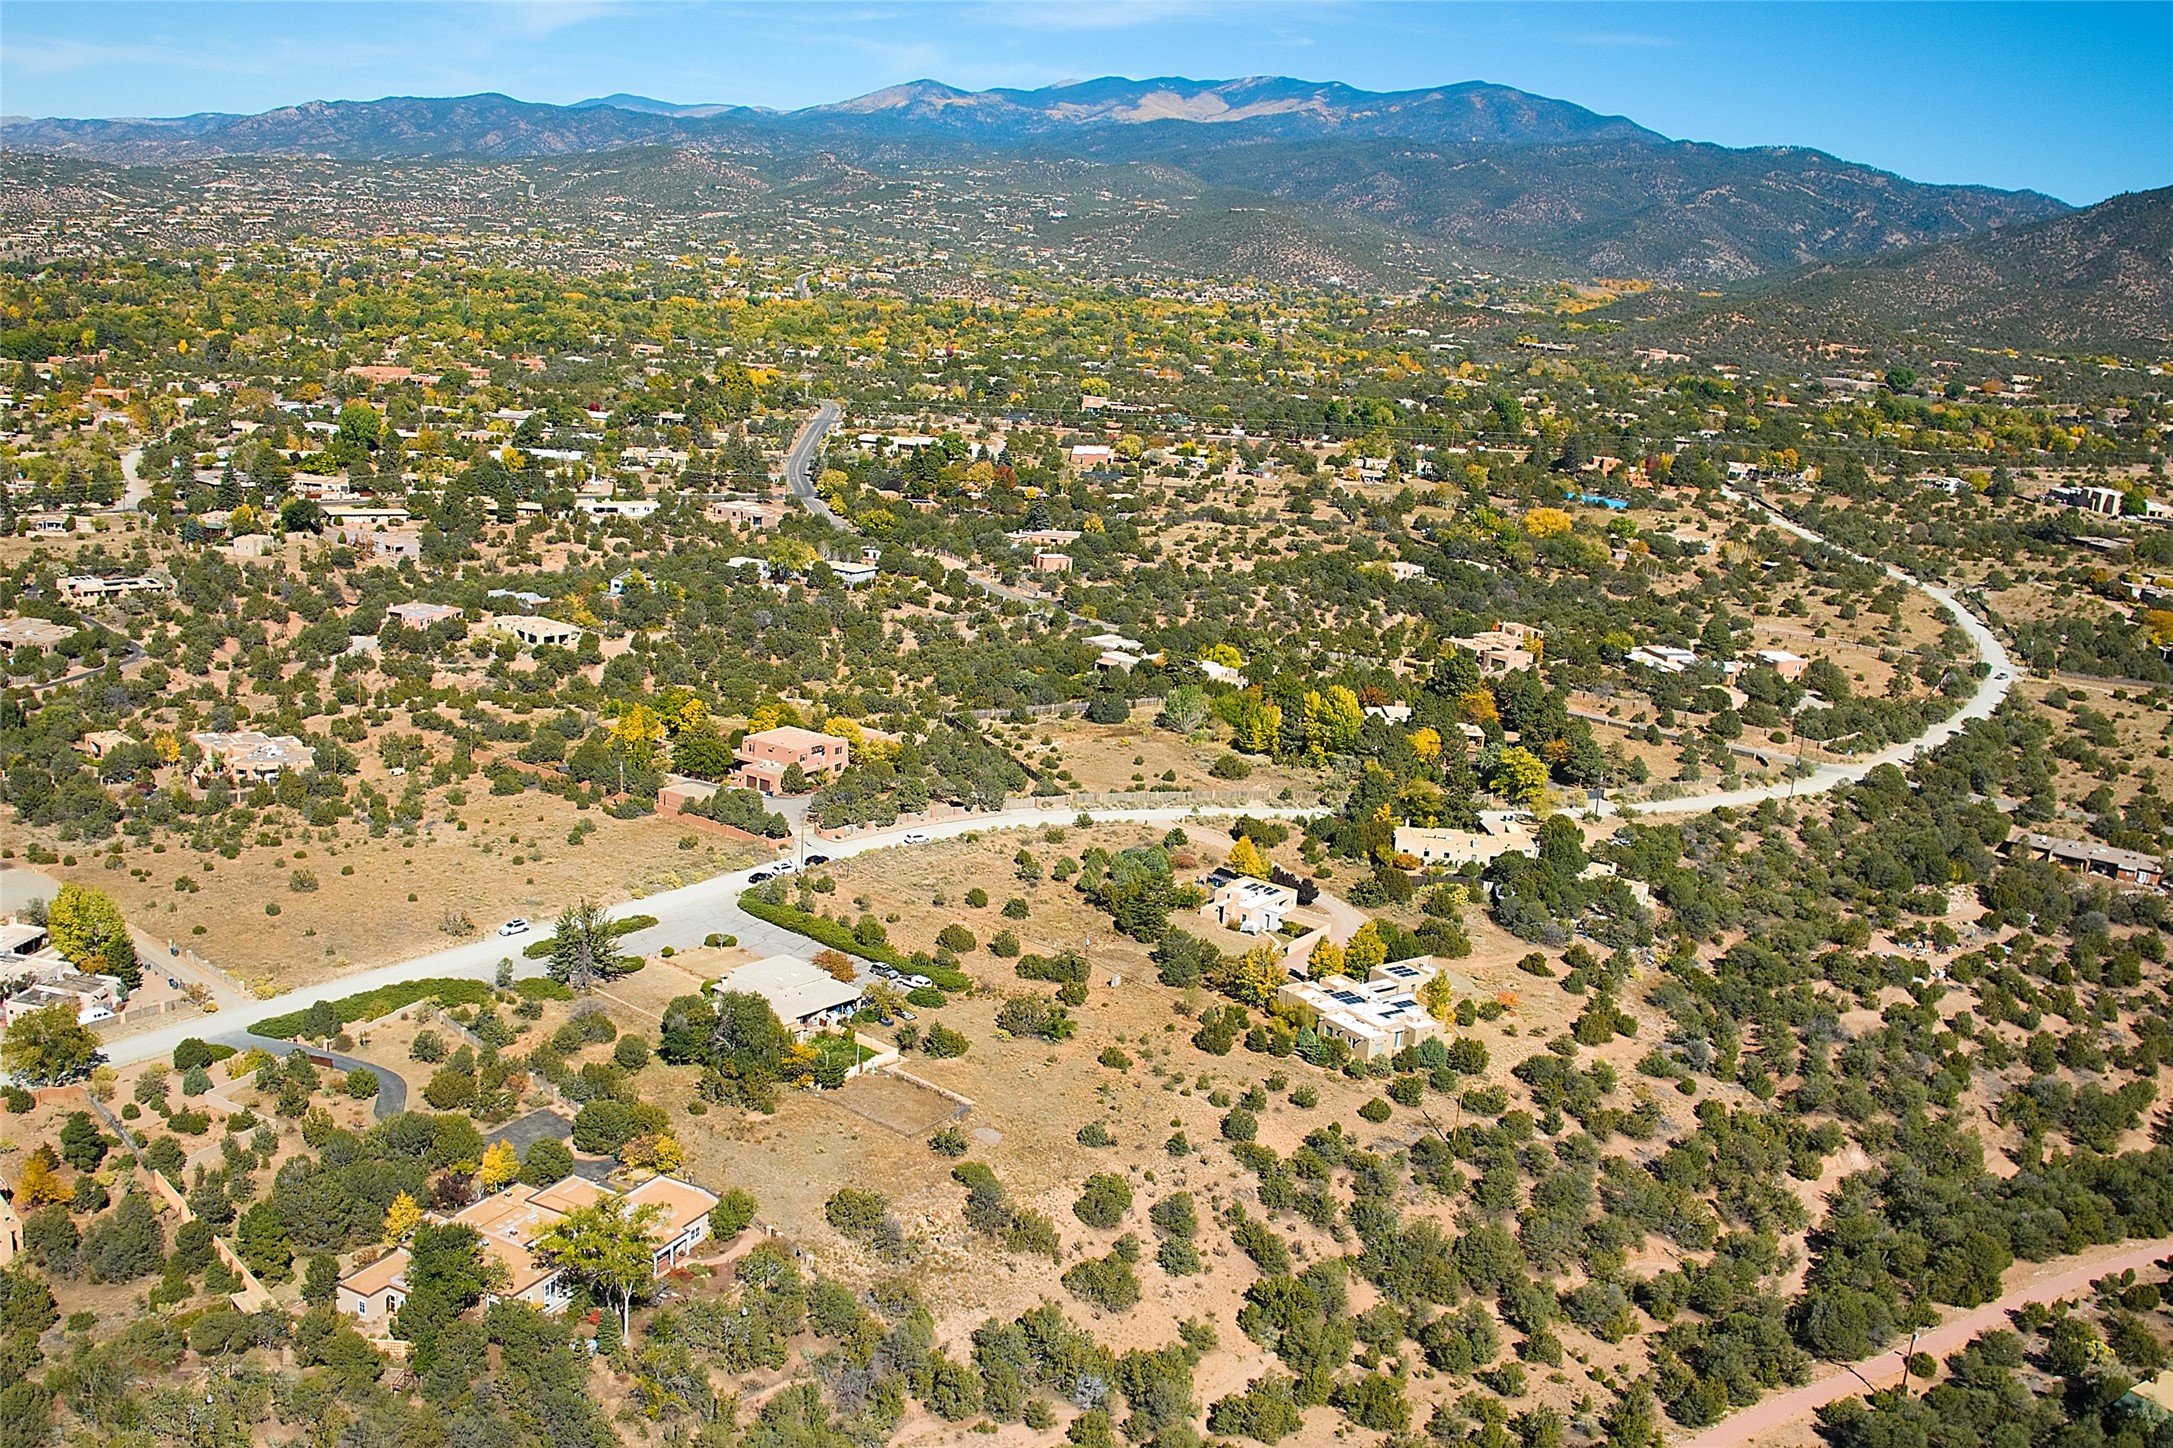 Aerial perspective, showing 498 Camino Pinones in the lower left